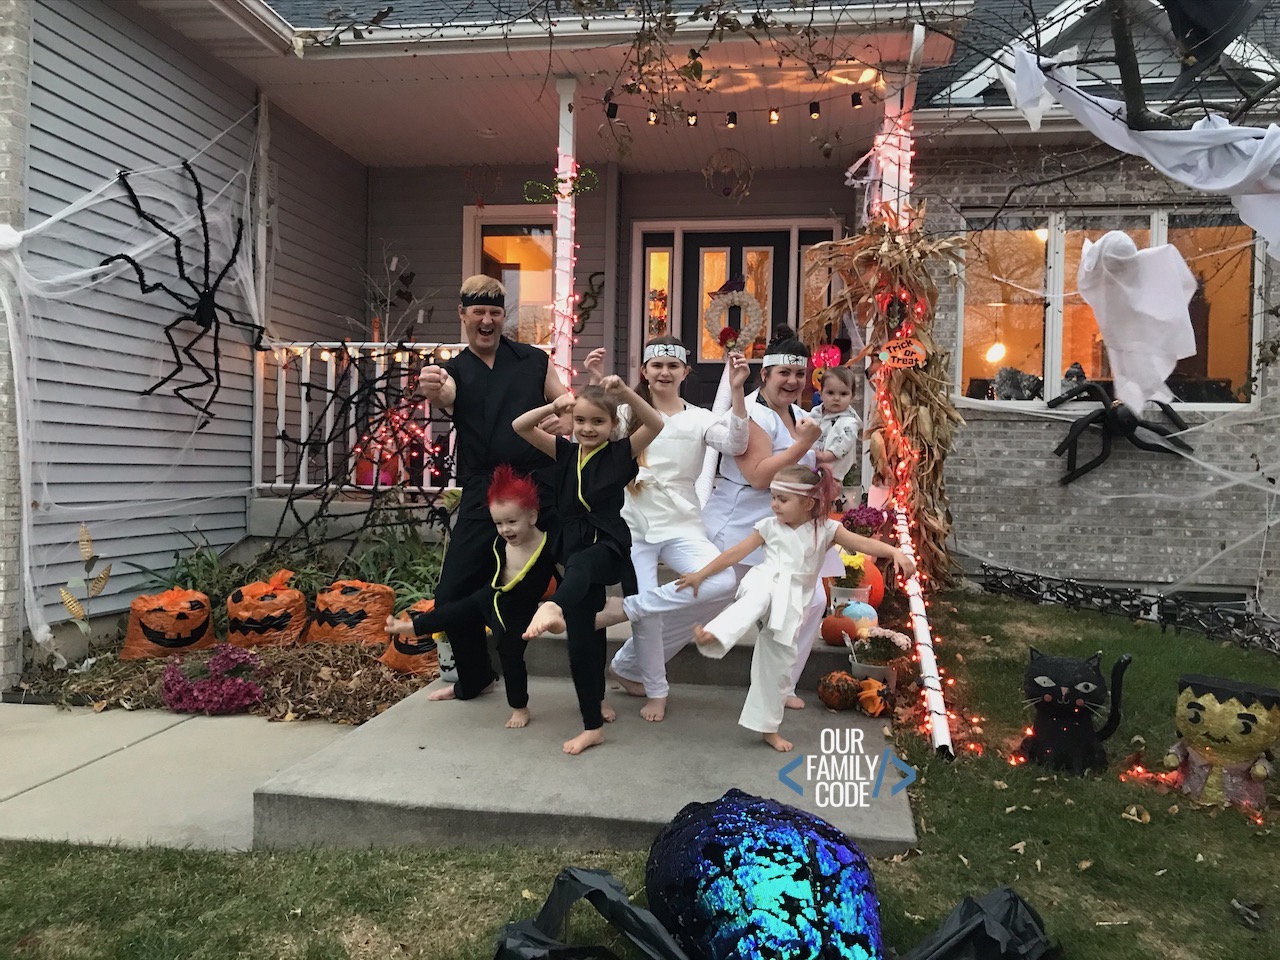 A picture of a family dressed up in Cobra Kai and Miyagi-do costumes for Halloween.